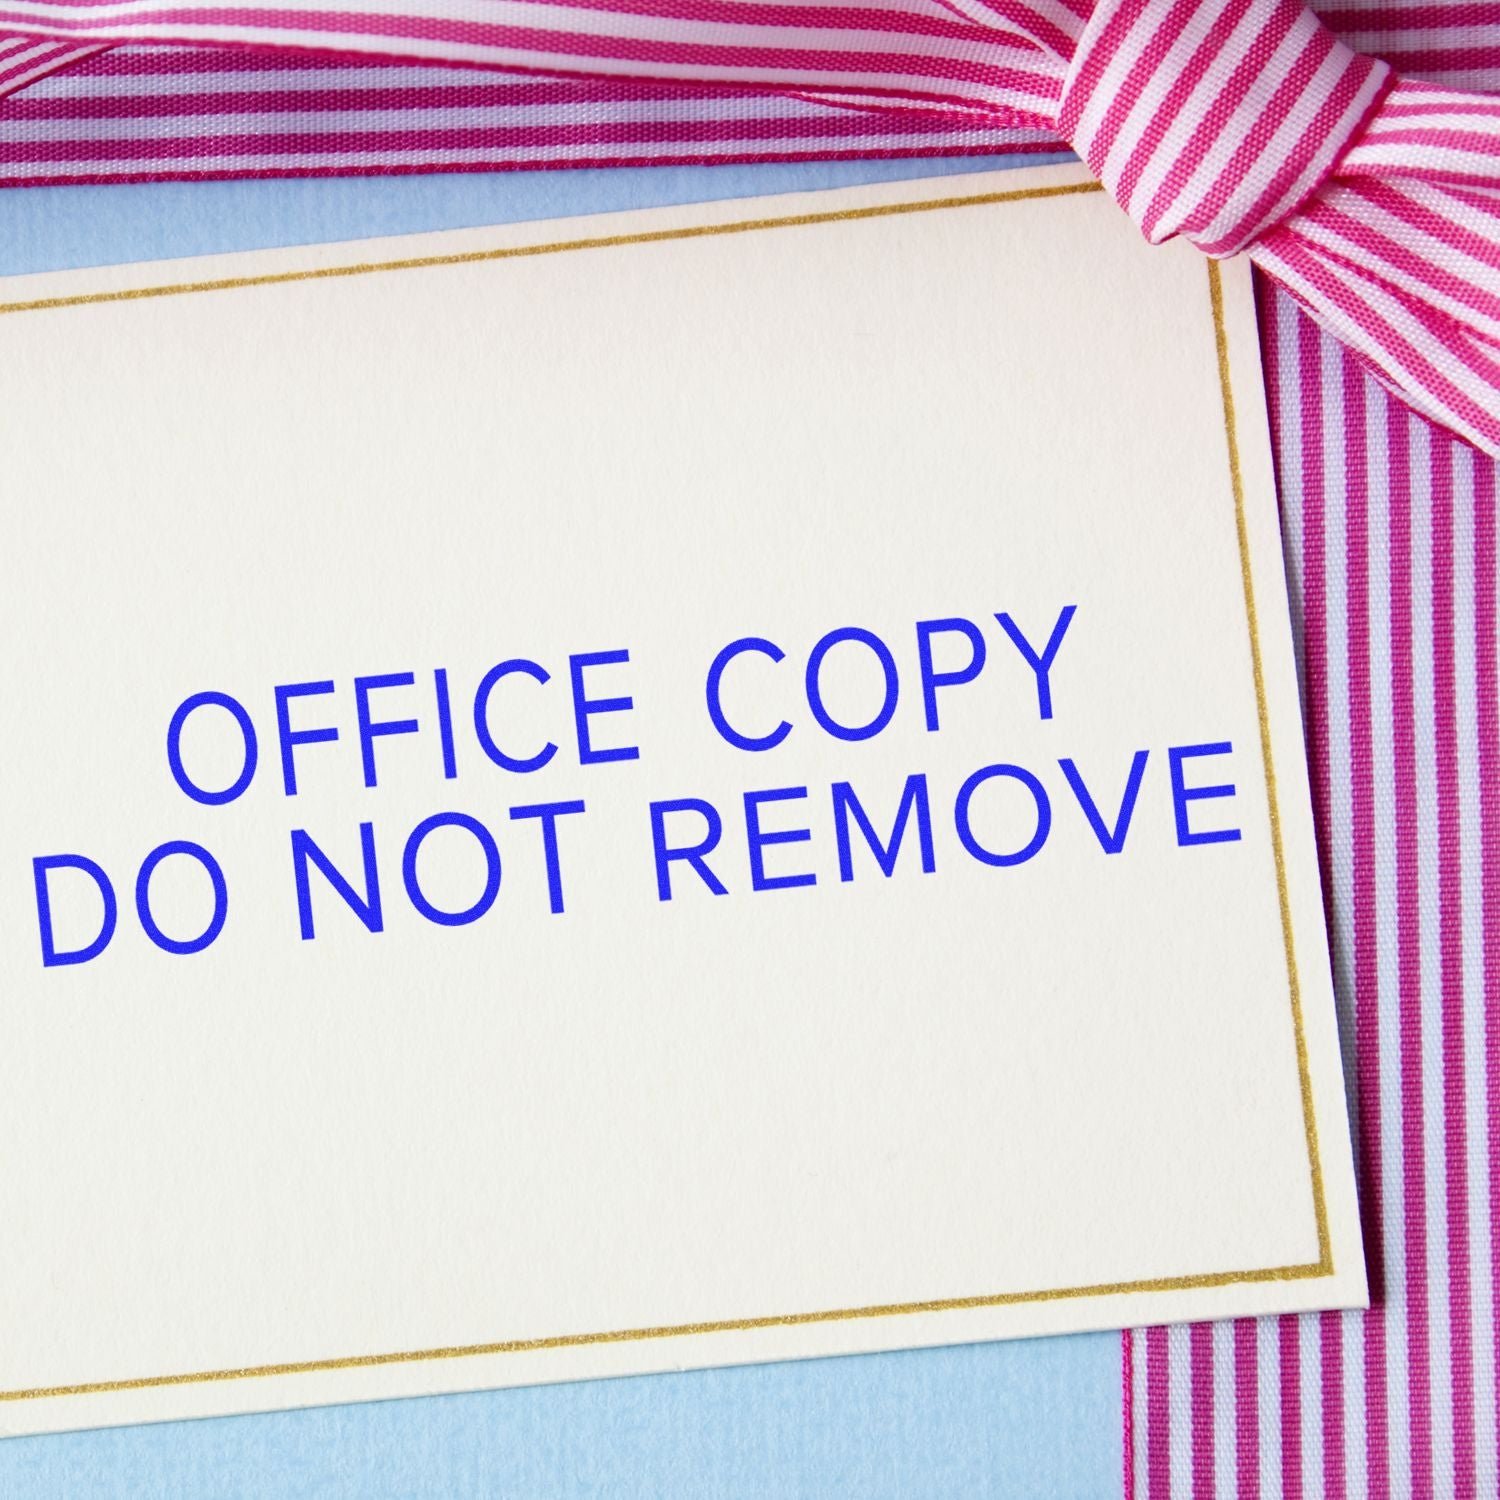 Large Pre-Inked Narrow Font Office Copy Do Not Remove Stamp In Use Photo